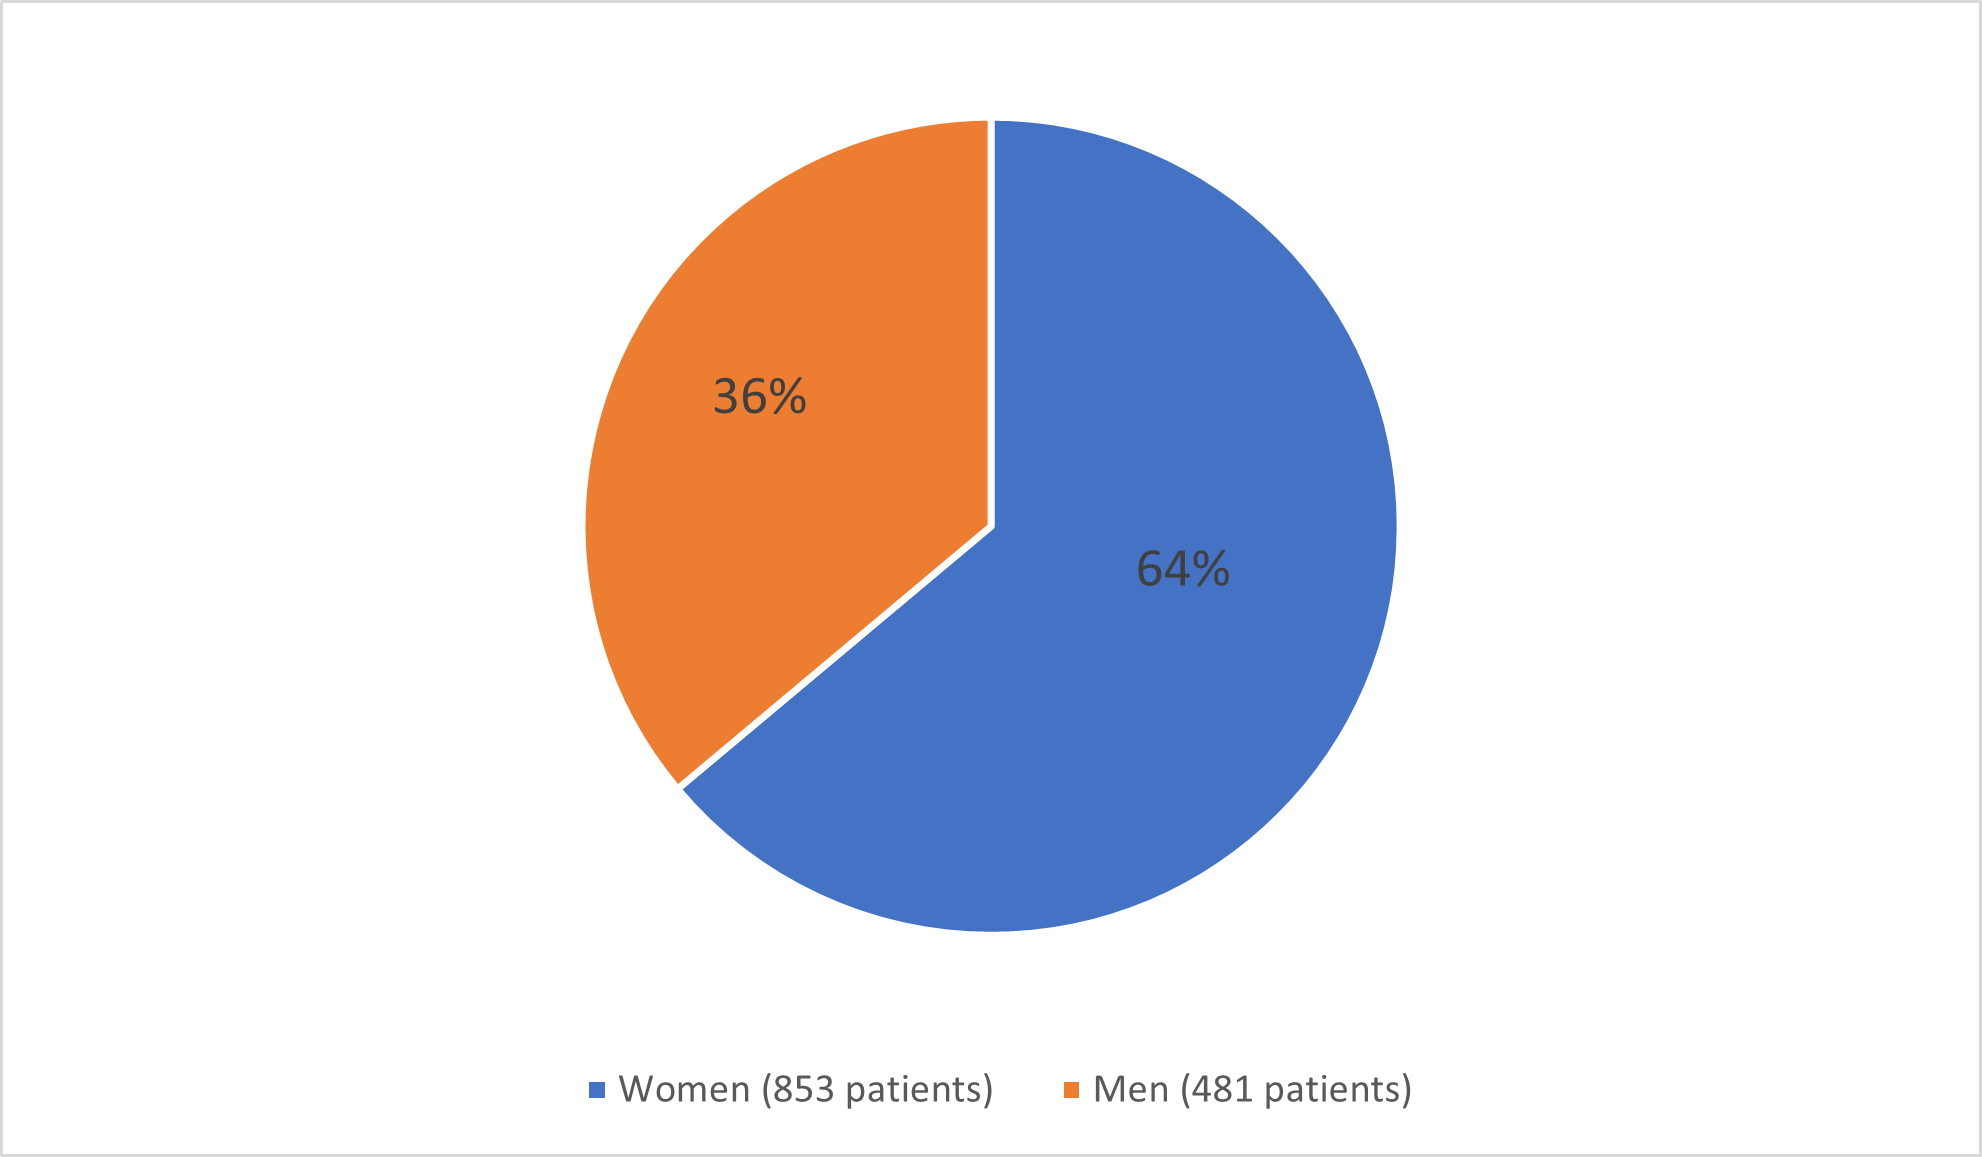 Pie chart summarizing how many men and women were in the clinical trial. In total, 481 (36%) men and 853 (64%) women participated in the clinical trial.